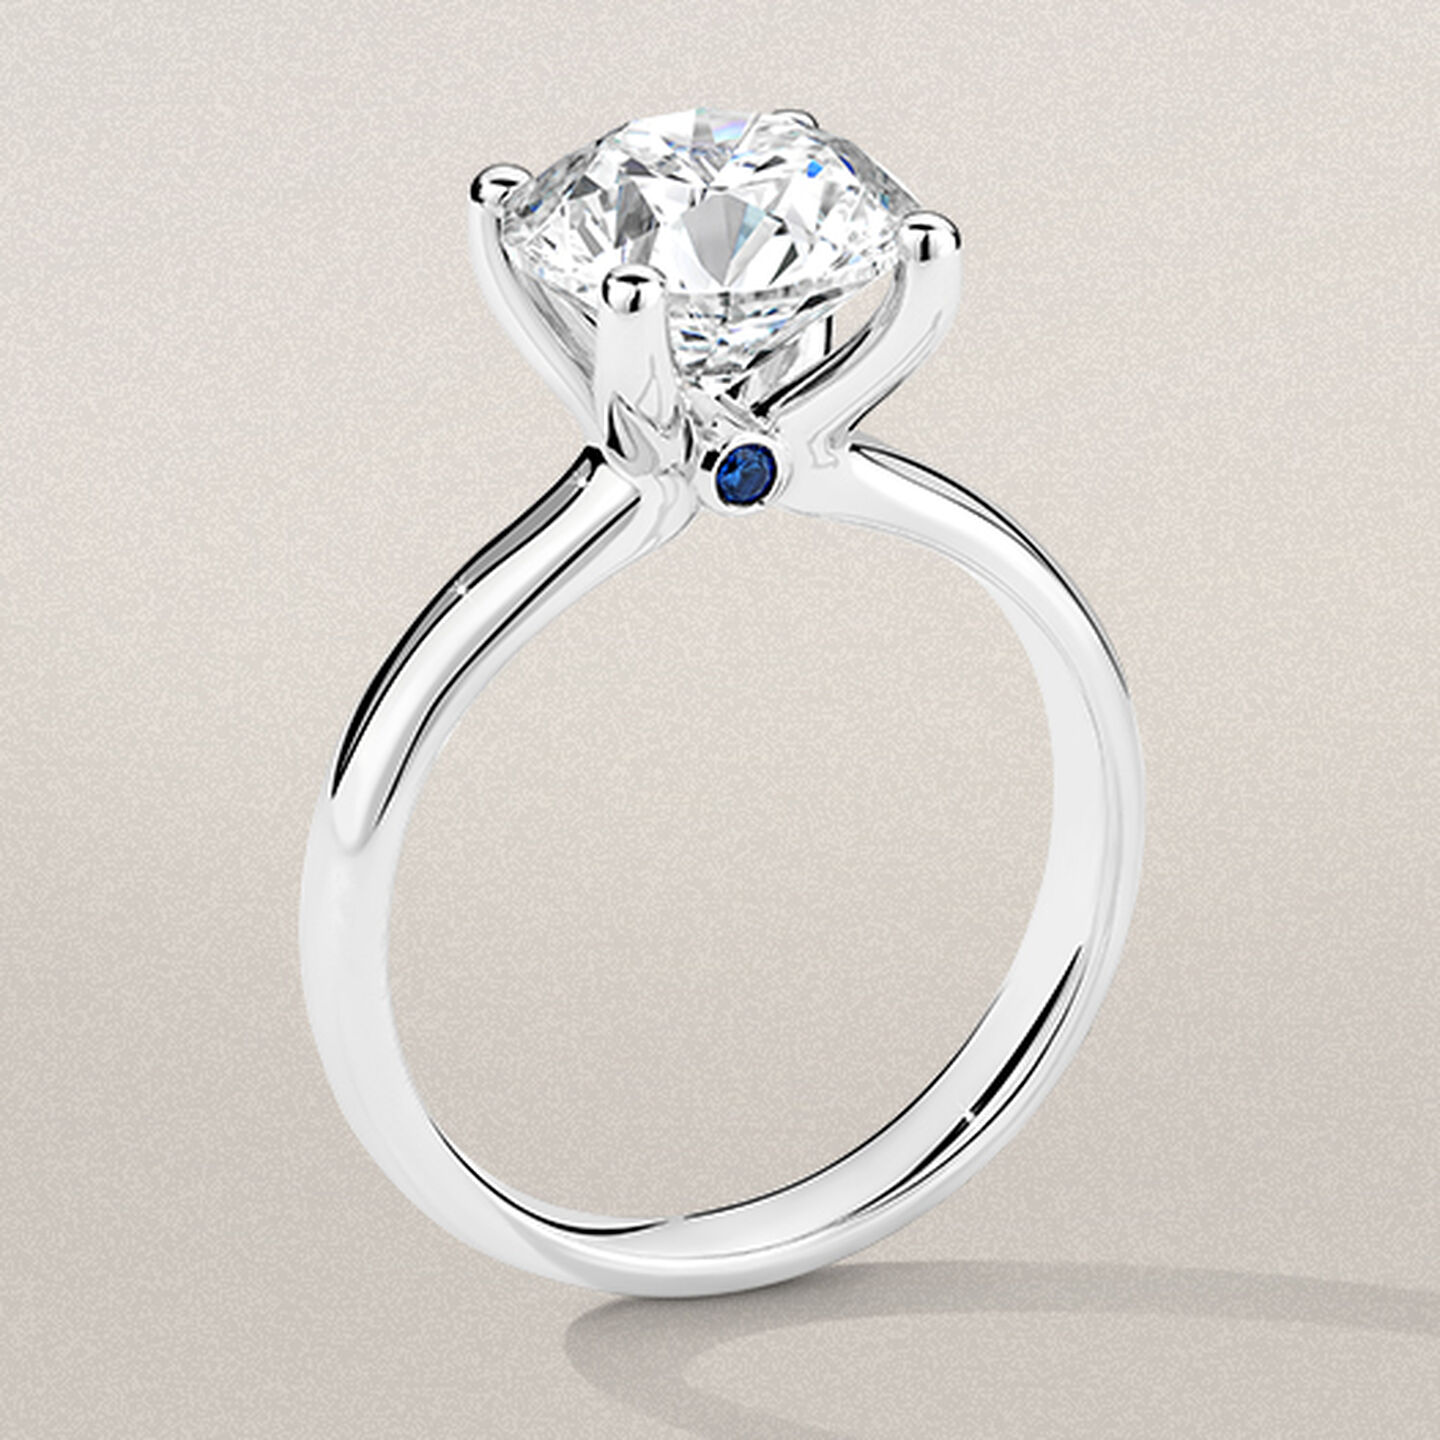 Birks Blue Diamond Engagement Ring with Sapphire Accent on a beige background.